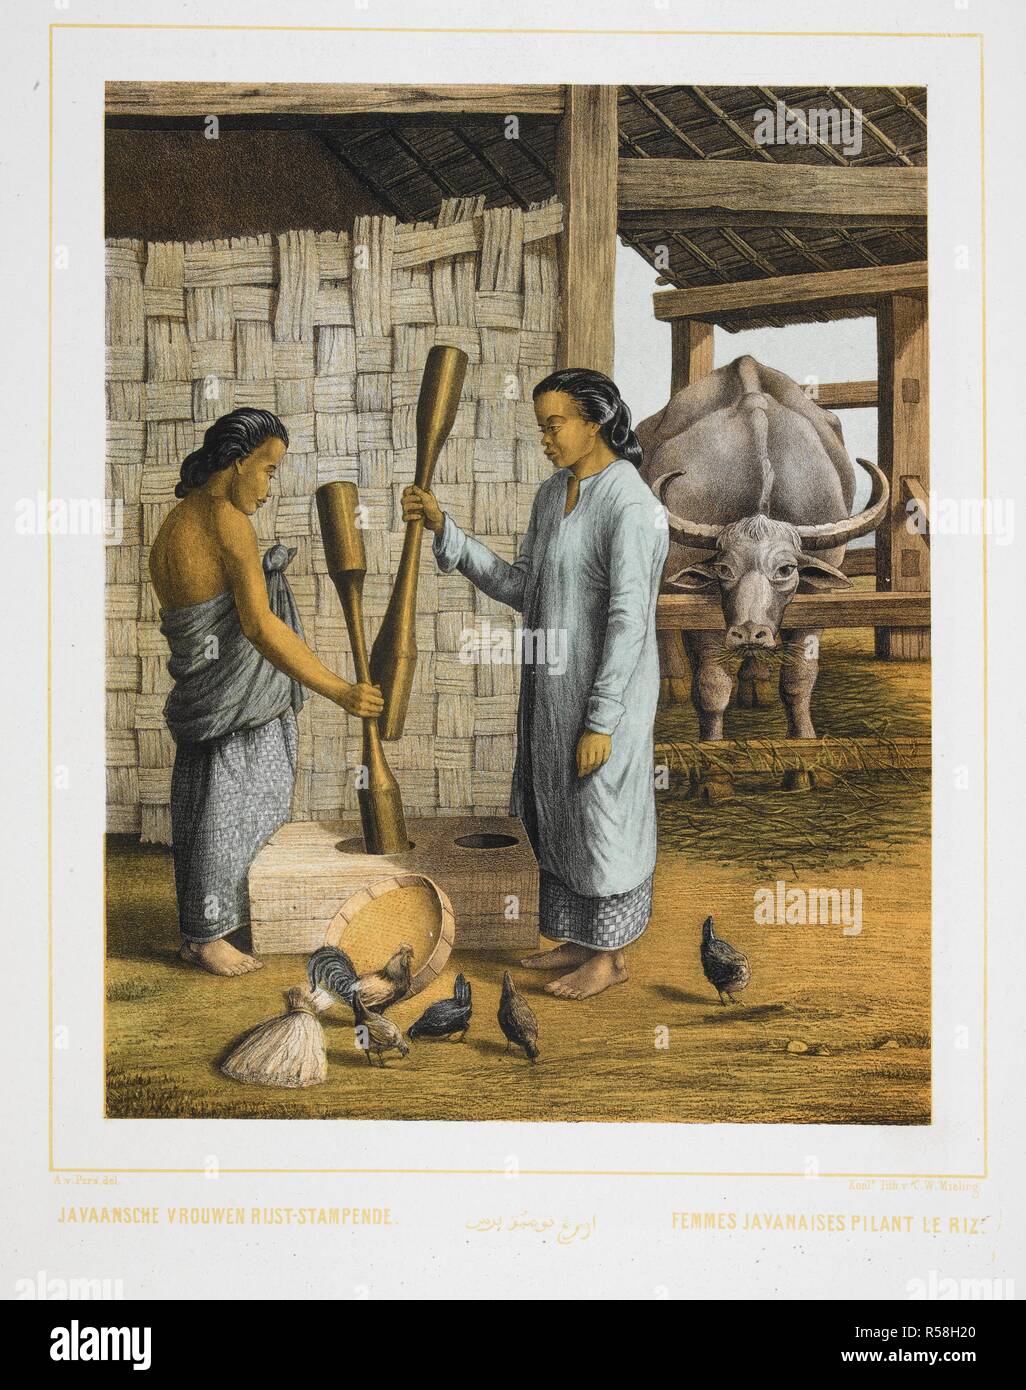 Two women of Java, grinding rice, on a farm. Chickens and an Ox can be seen. . Nederlandsch Oost-Indischen Typen. Types Indiens Neerlandais. ... S' Gravenhage, 1854-56. Colour illustration. Source: 1781.c.23, plate 30. Language: Dutch. Author: Pers, A. Van. Stock Photo